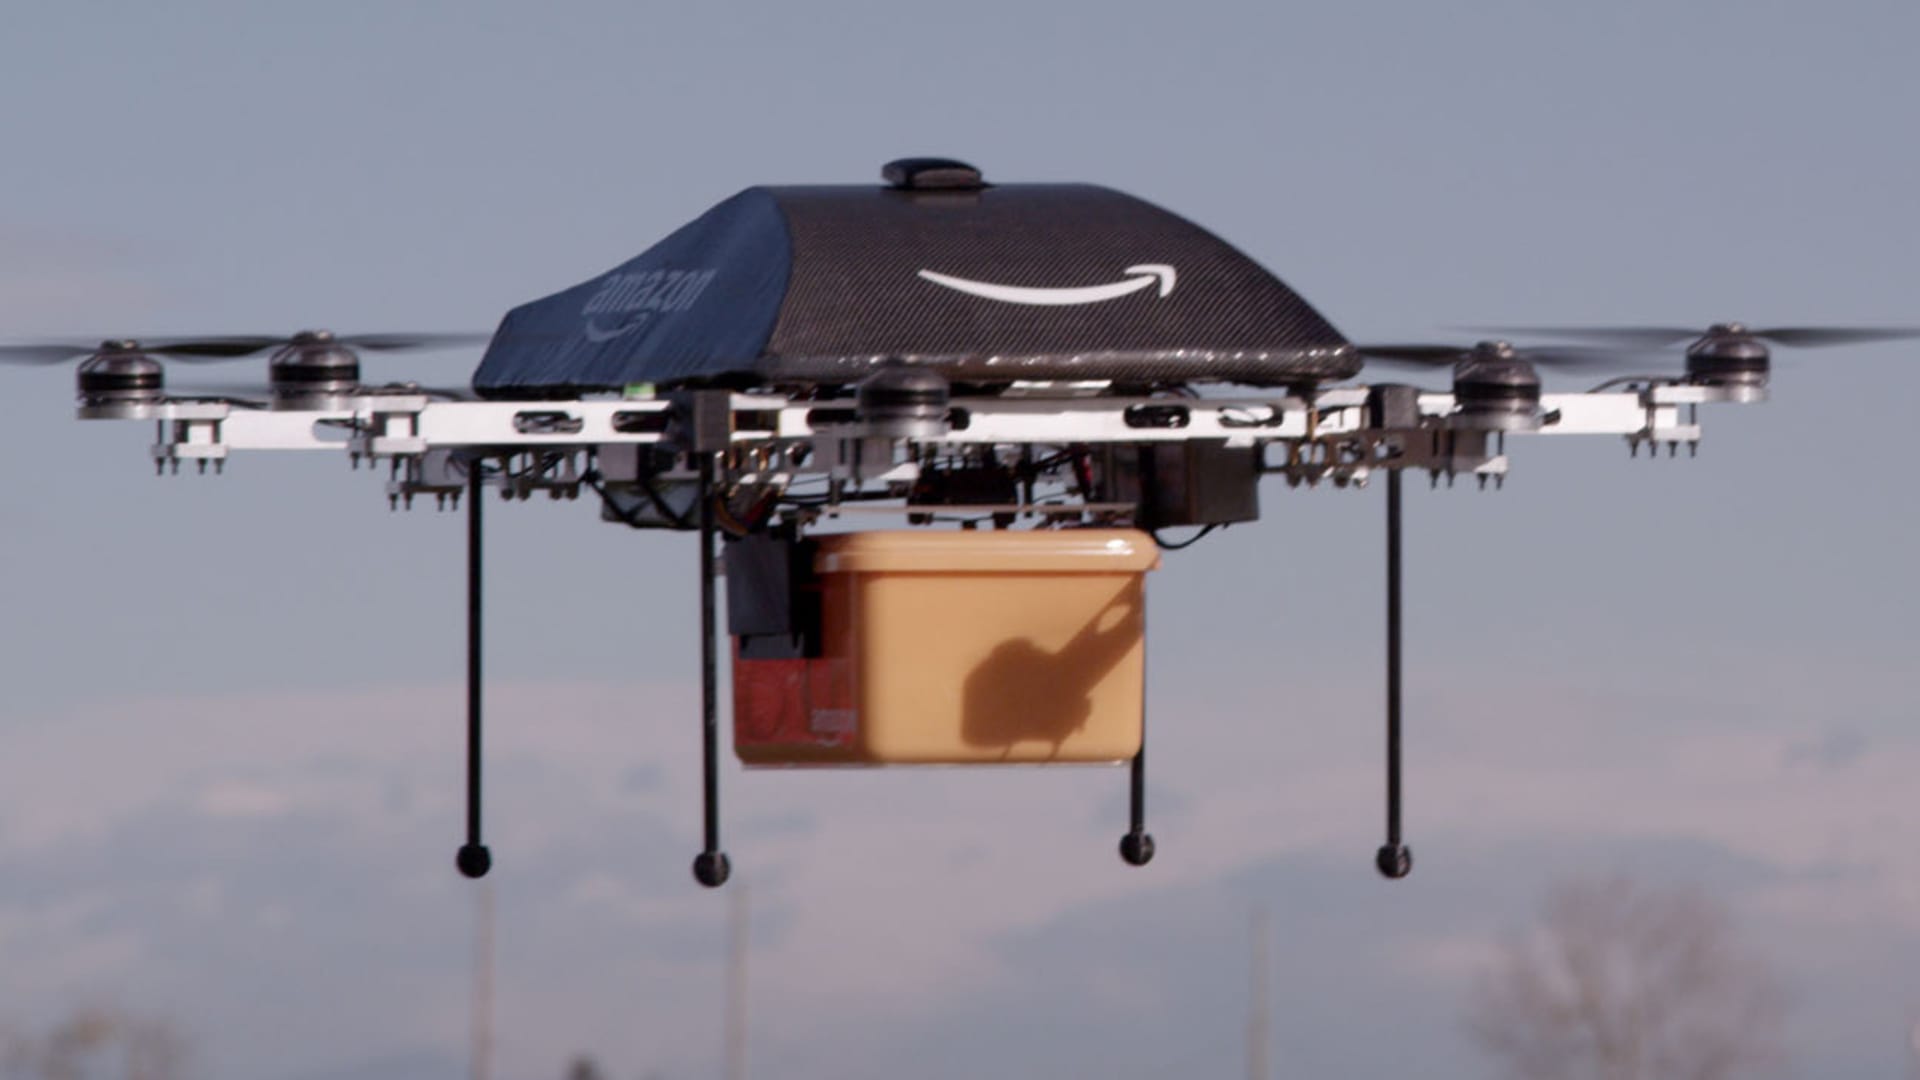 Amazon Switches Up: Drone Deliveries End in California But Take Flight in Phoenix